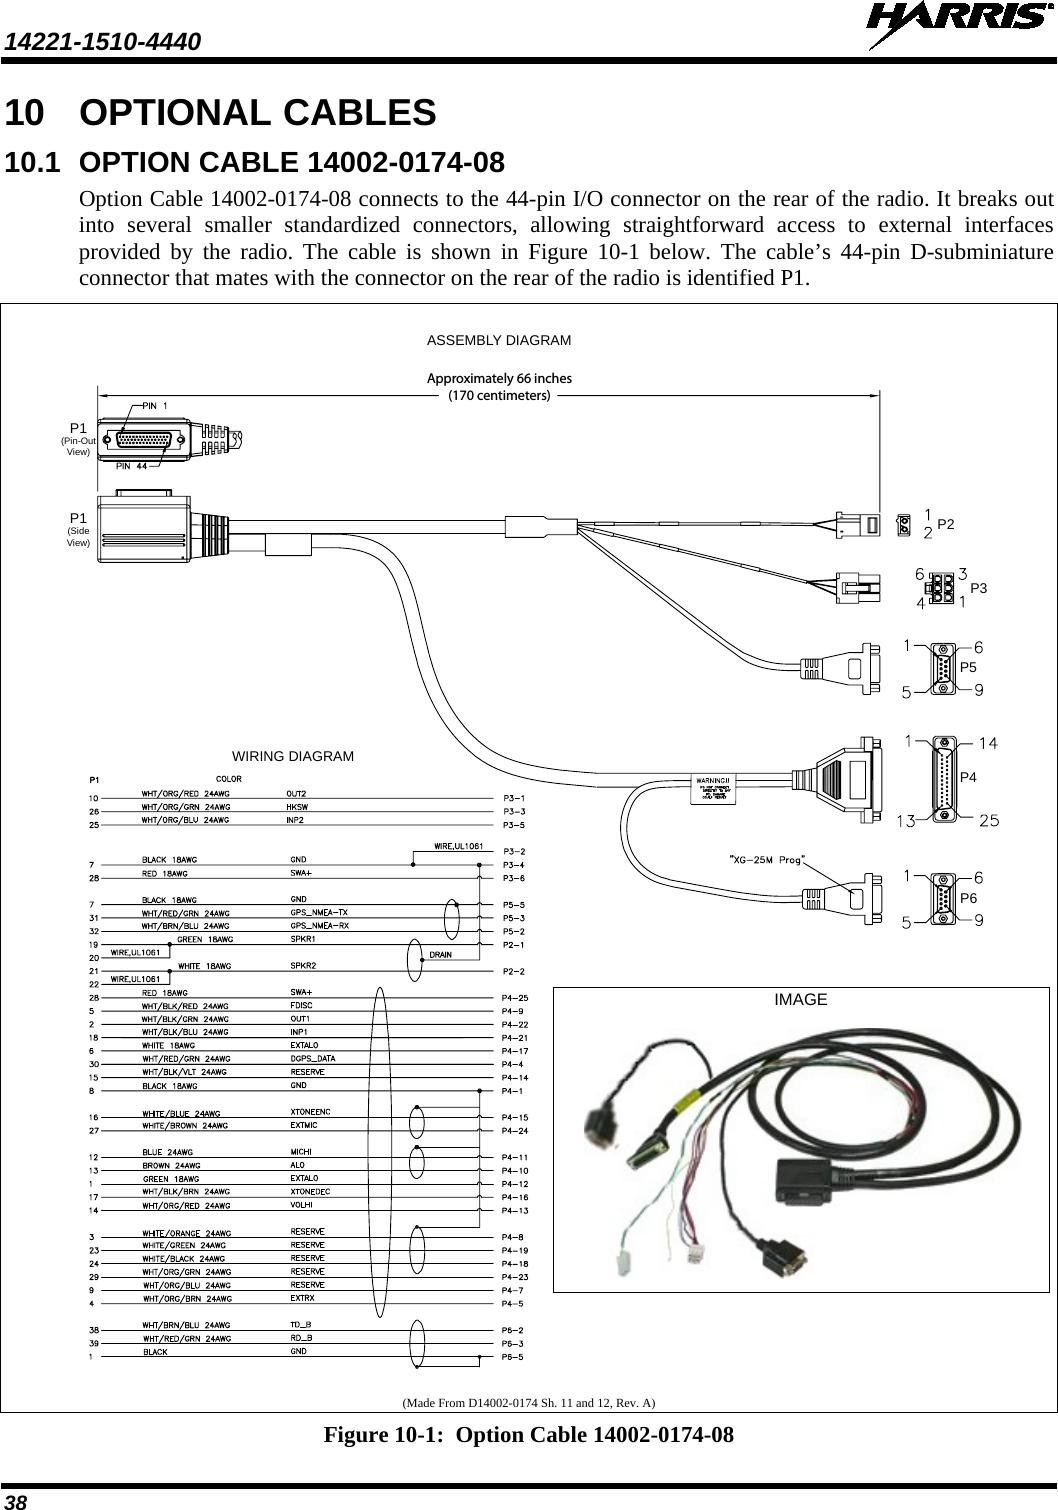 14221-1510-4440   38 10 OPTIONAL CABLES 10.1 OPTION CABLE 14002-0174-08 Option Cable 14002-0174-08 connects to the 44-pin I/O connector on the rear of the radio. It breaks out into  several smaller standardized connectors, allowing straightforward access to external  interfaces provided by the radio.  The  cable is shown in Figure  10-1  below.  The cable’s 44-pin D-subminiature connector that mates with the connector on the rear of the radio is identified P1.    (Made From D14002-0174 Sh. 11 and 12, Rev. A) Figure 10-1:  Option Cable 14002-0174-08 Approximately 66 inches(170 centimeters)ASSEMBLY DIAGRAMWIRING DIAGRAMP1(Pin-OutView)P1(SideView)P6P2P3P5P4IMAGE   